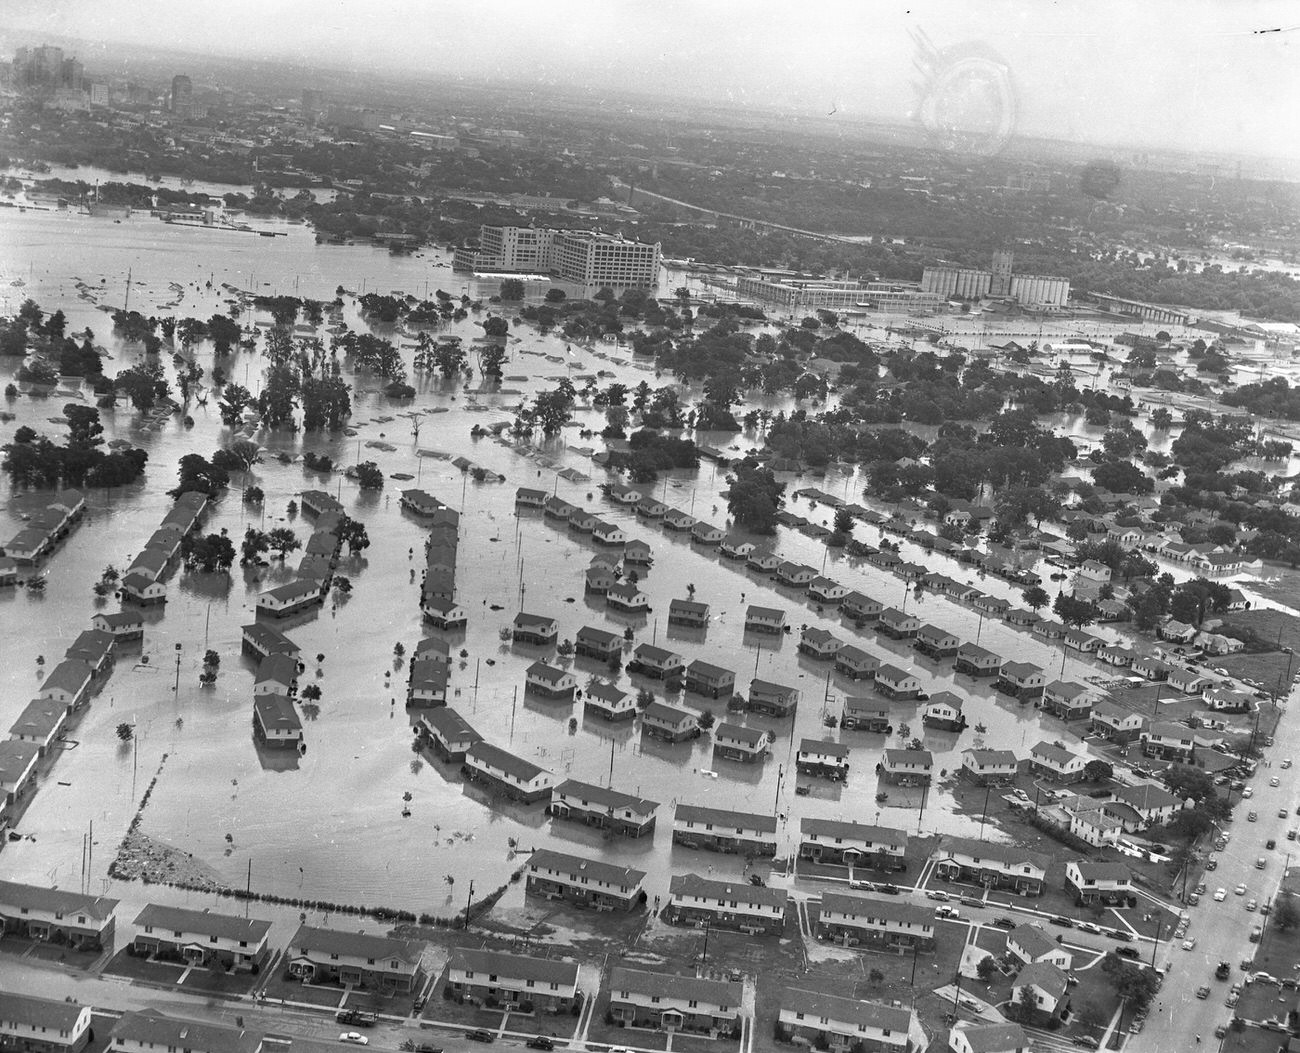 Fort Worth flood of 1949 showing a neighborhood of homes under water, 1949